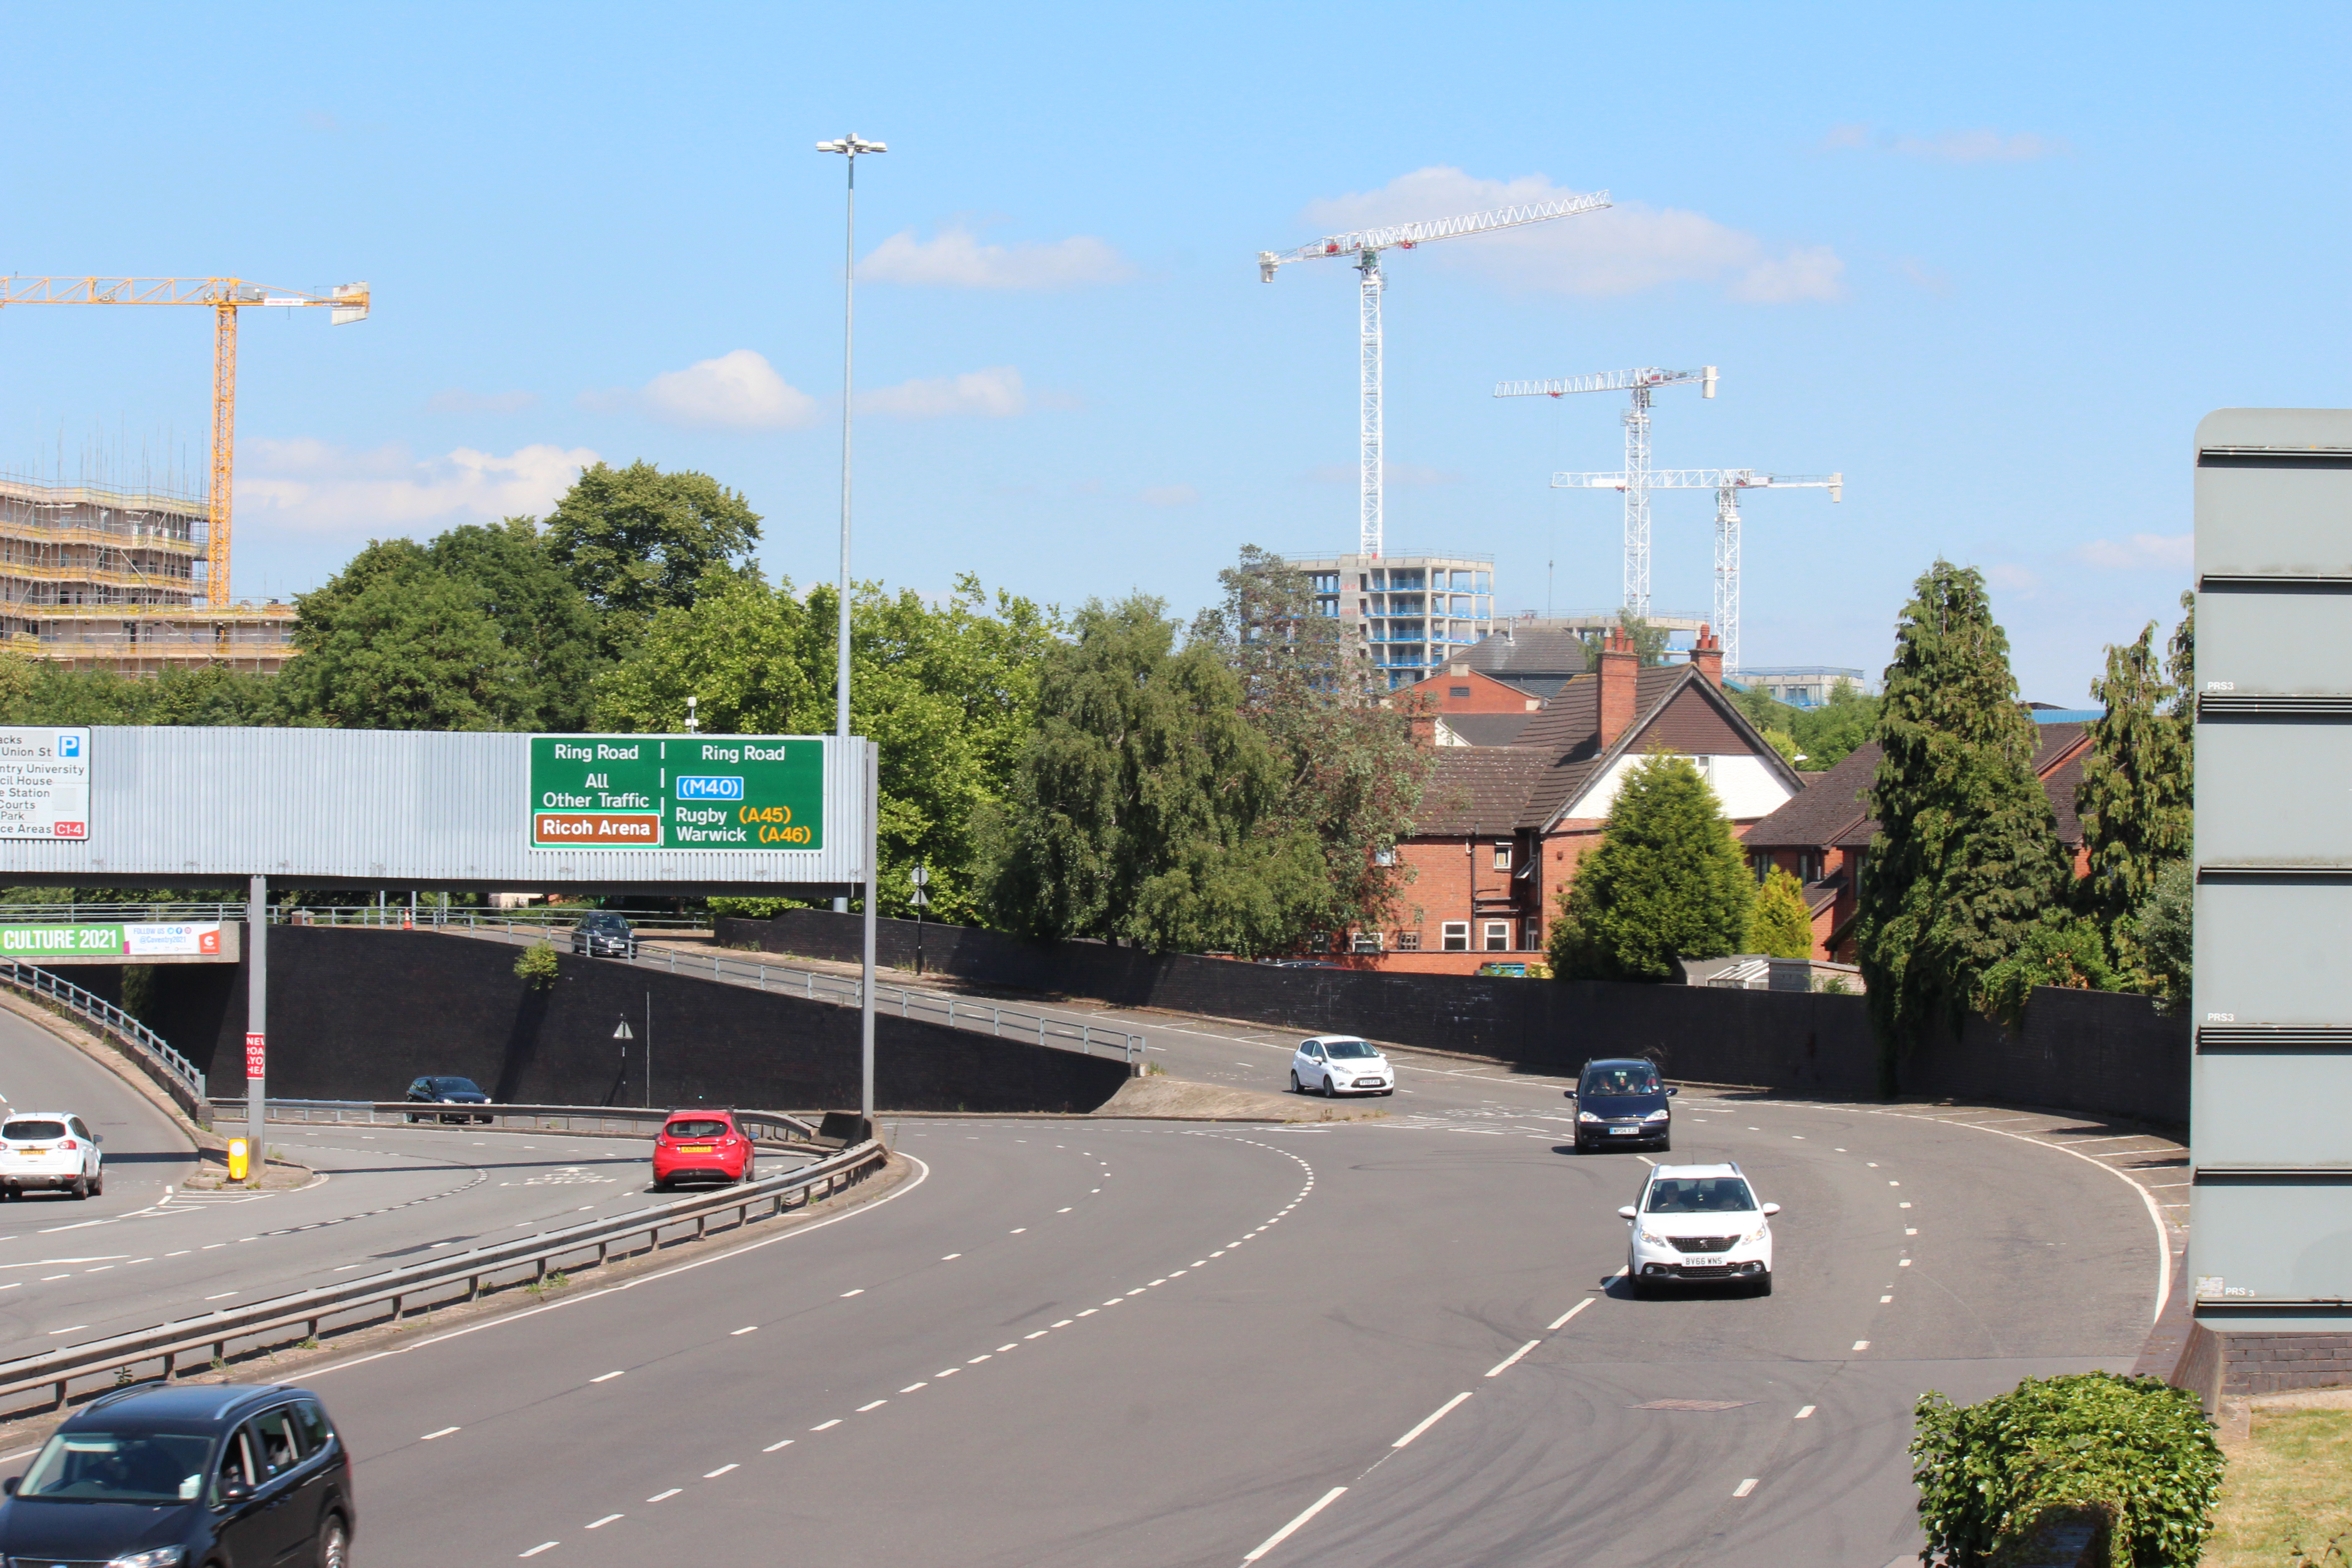 Construction Projects in Coventry